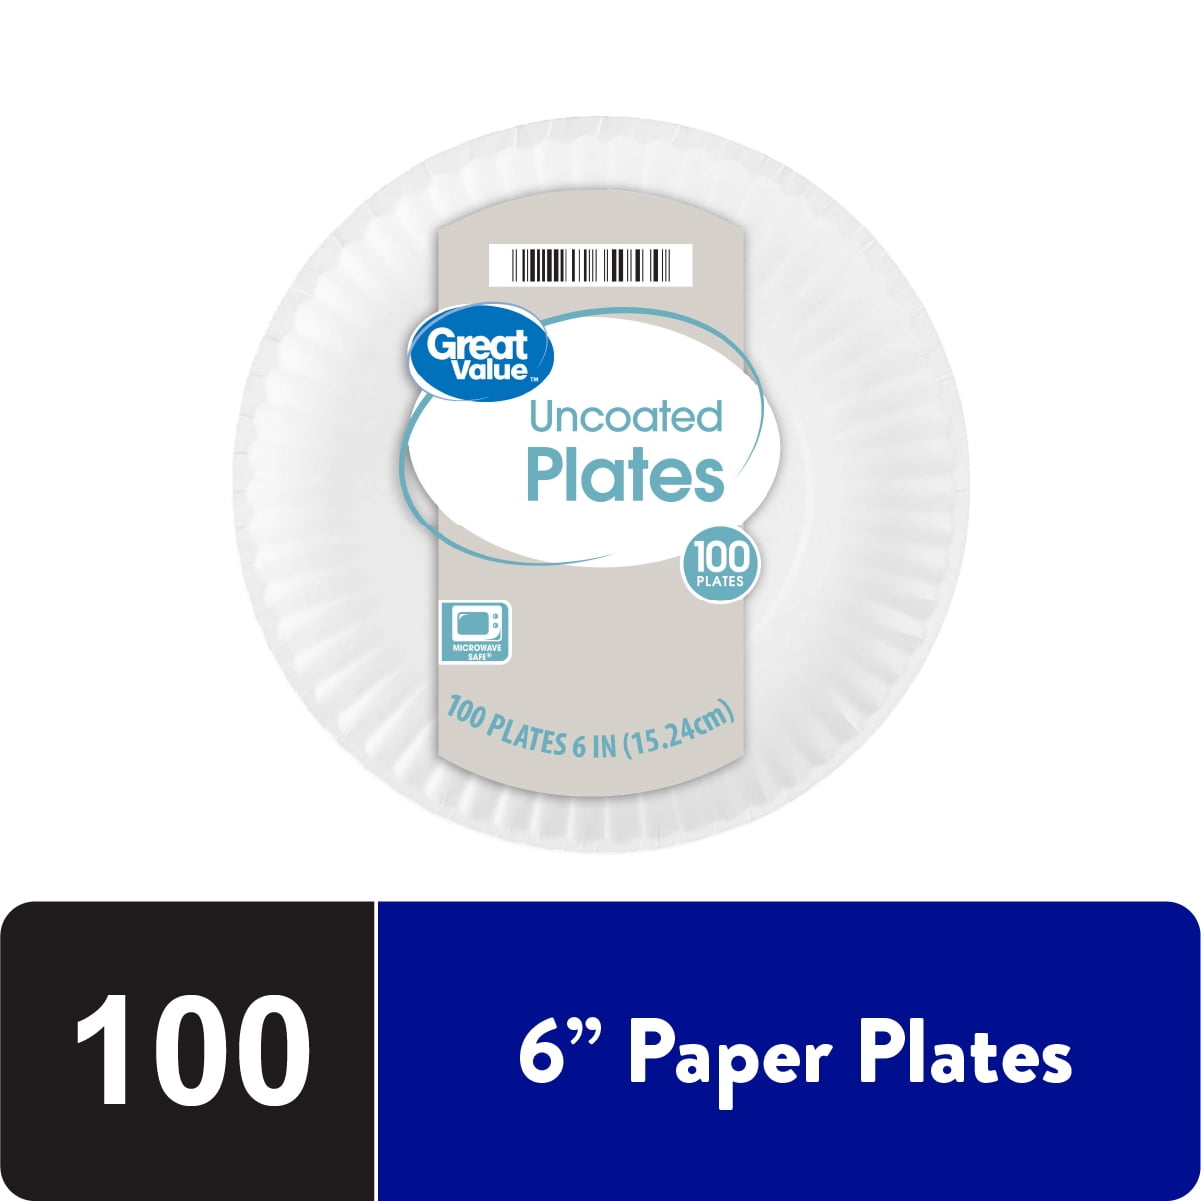 Blue  Baby Carriage  7 in Square Paper Plates 8/pkg  LOT OF 6 PKGS